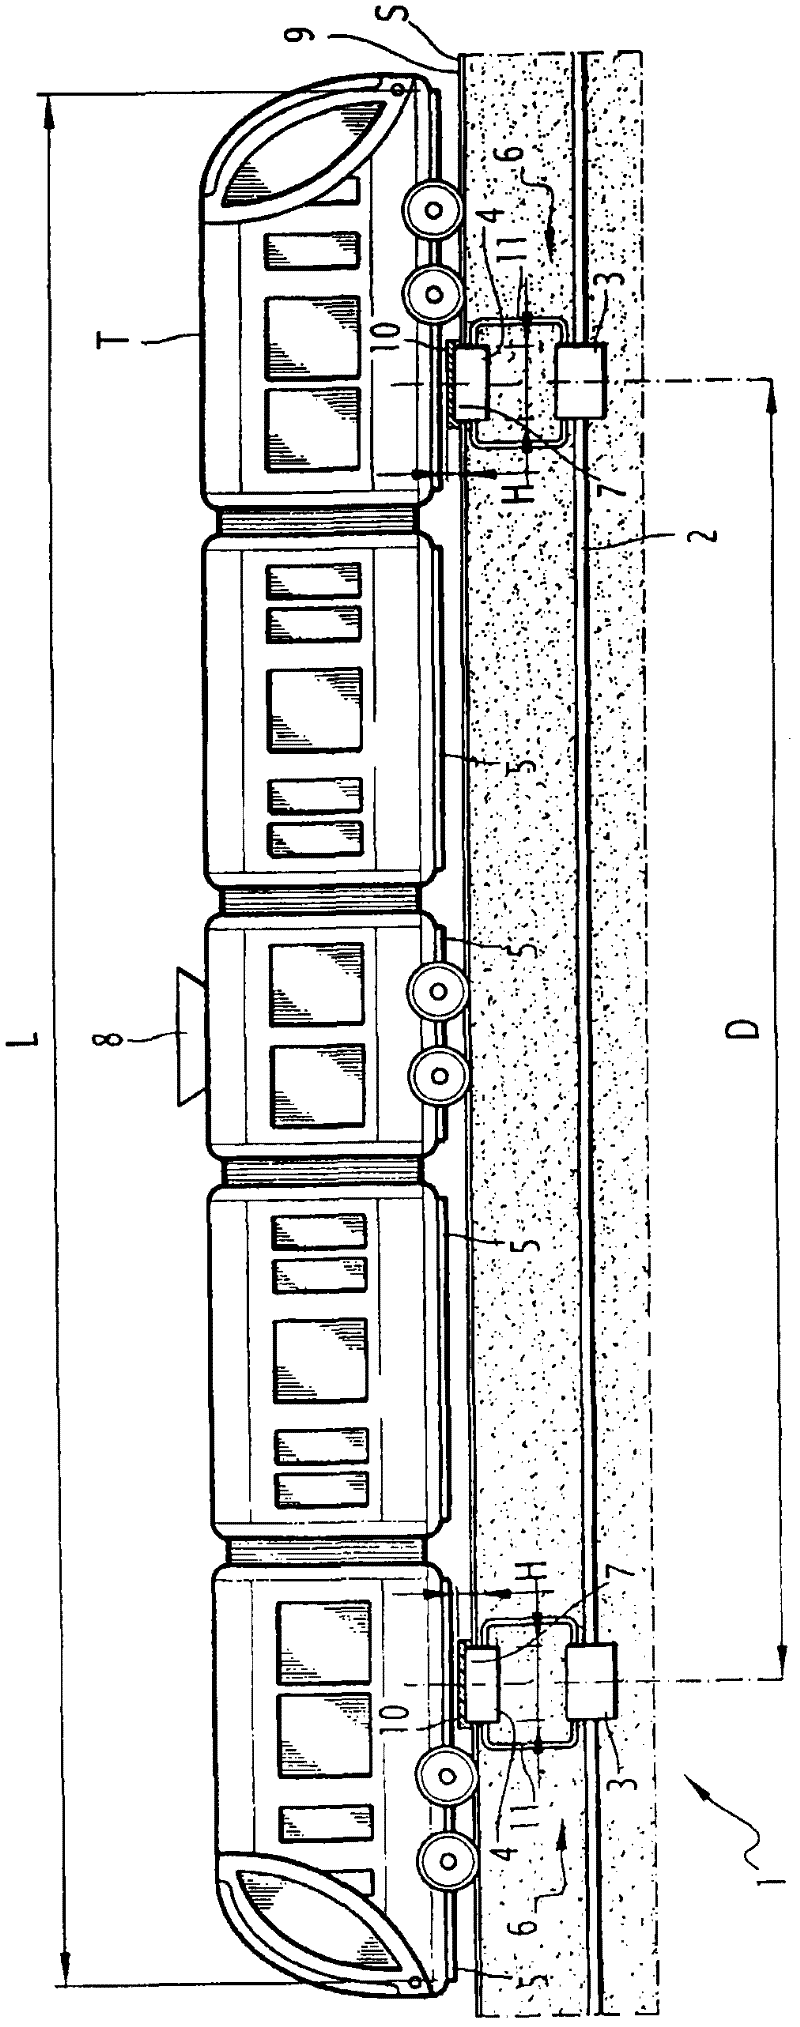 Ground-based power supply system for a transportation vehicle and associated methods